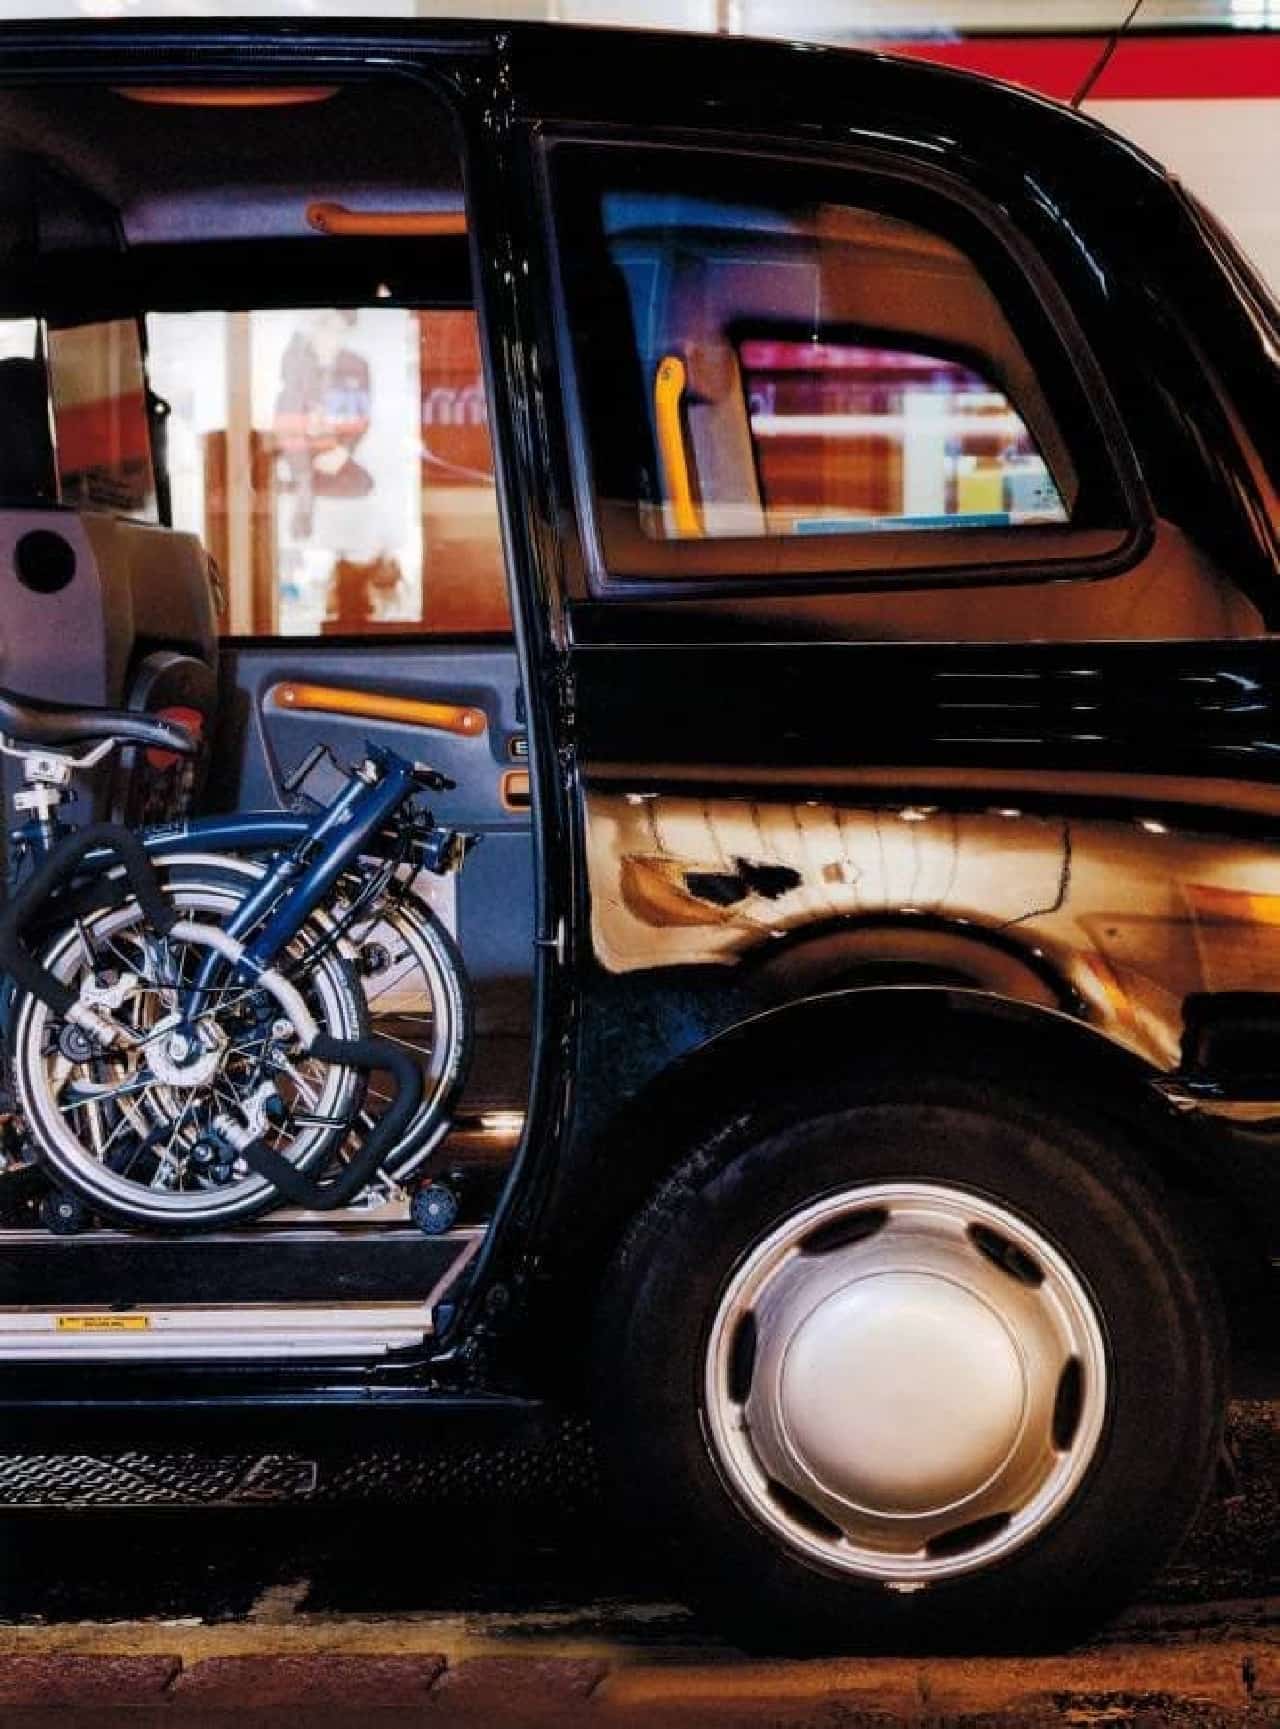 In such a case, "BROMPTON" can be placed in the back seat of a taxi.